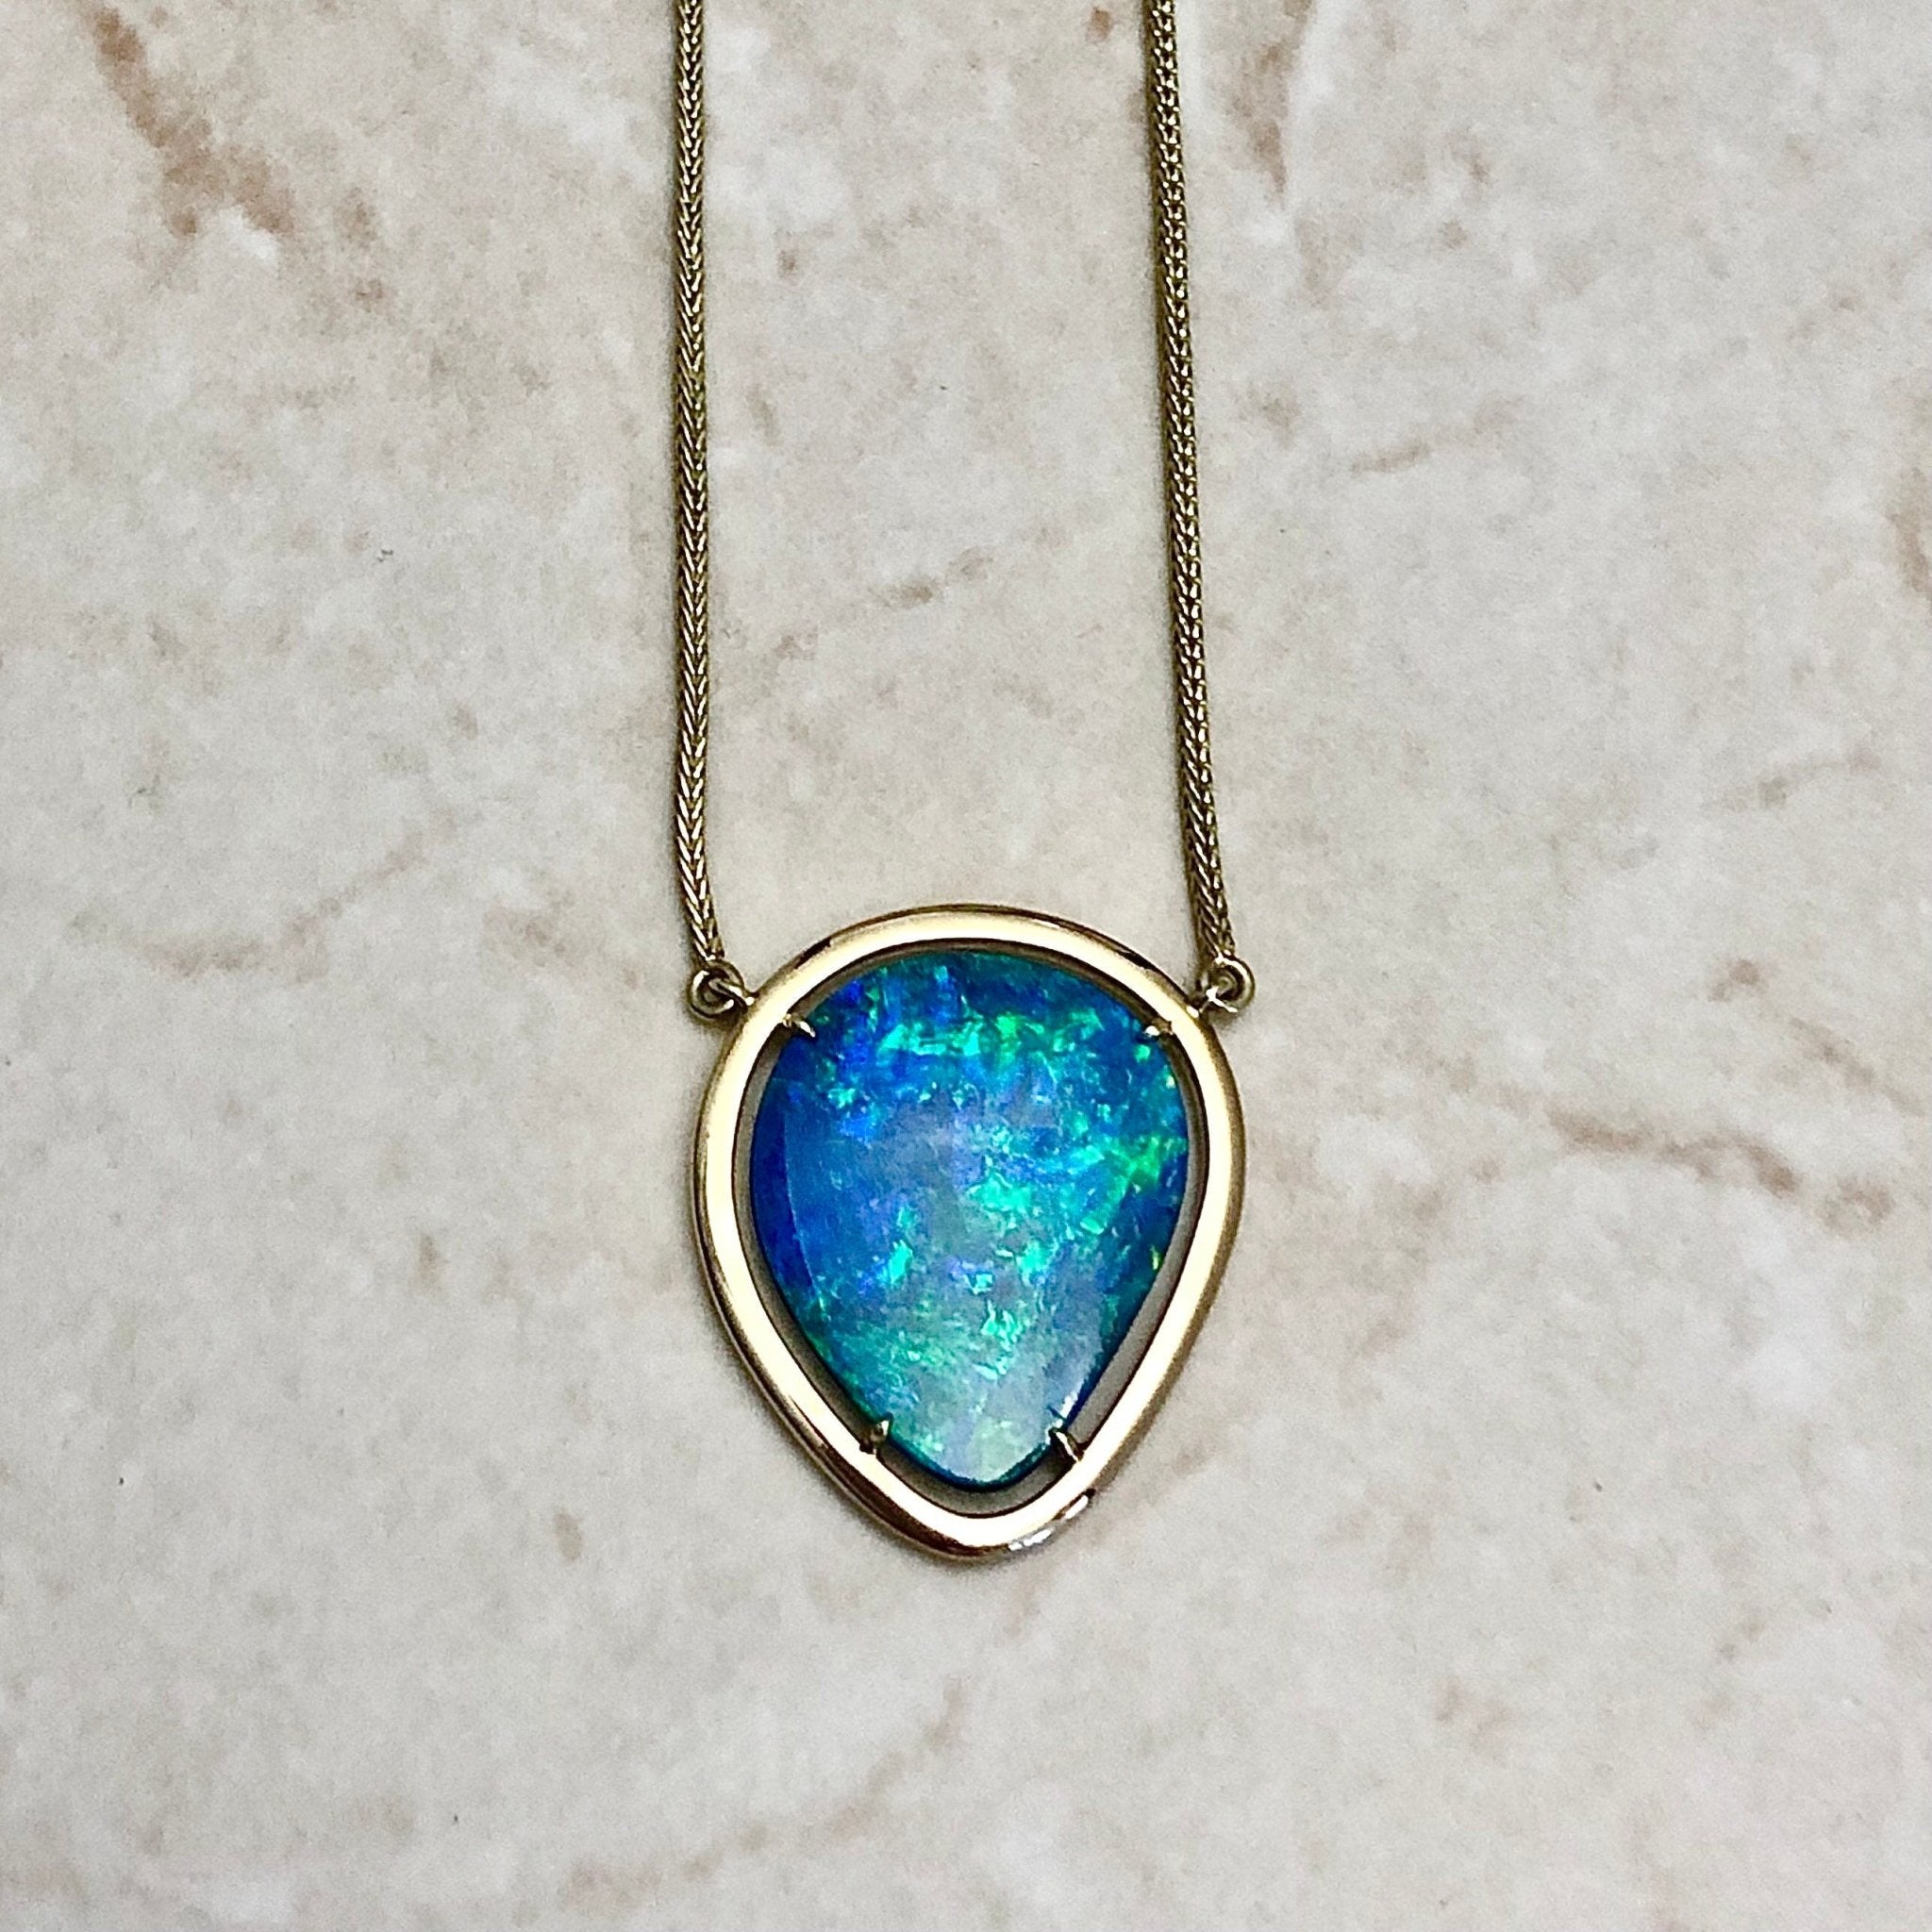 Silver necklace/pendant, 1 big boulder opal from Australia: Important,  french vat is included,20% off for US,australian and canadian buyers